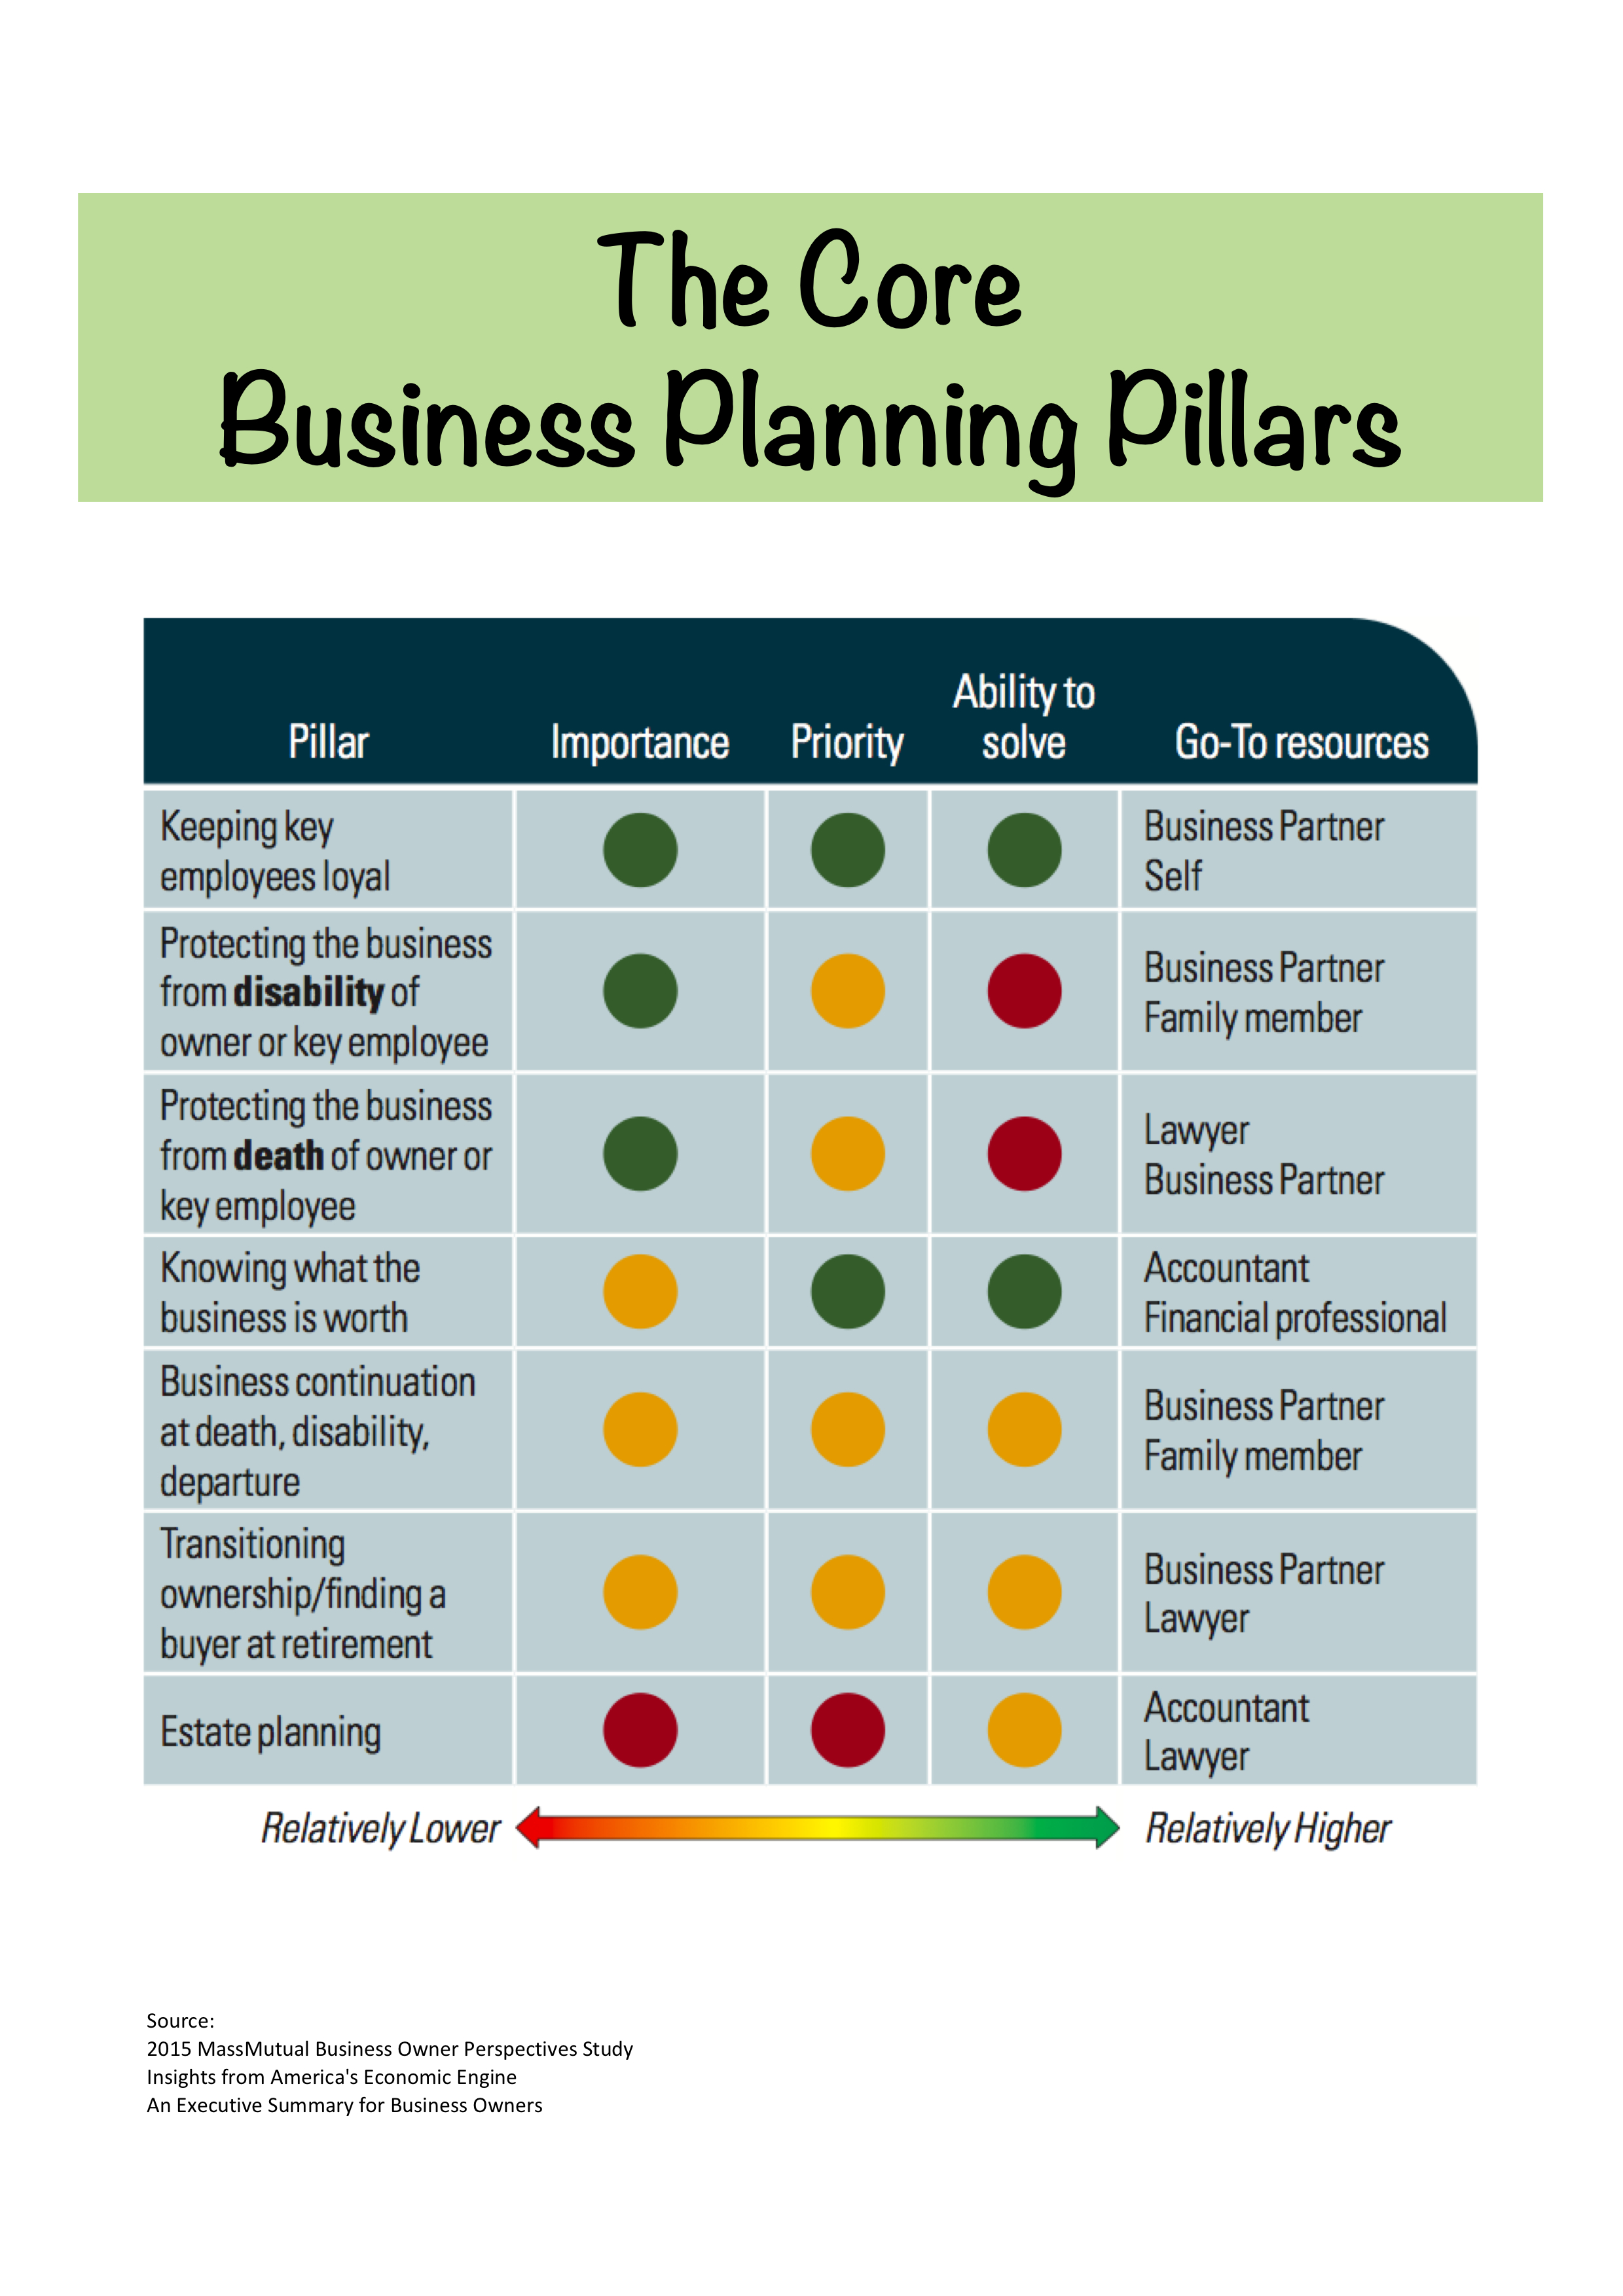 The Core Business Planning Pillars